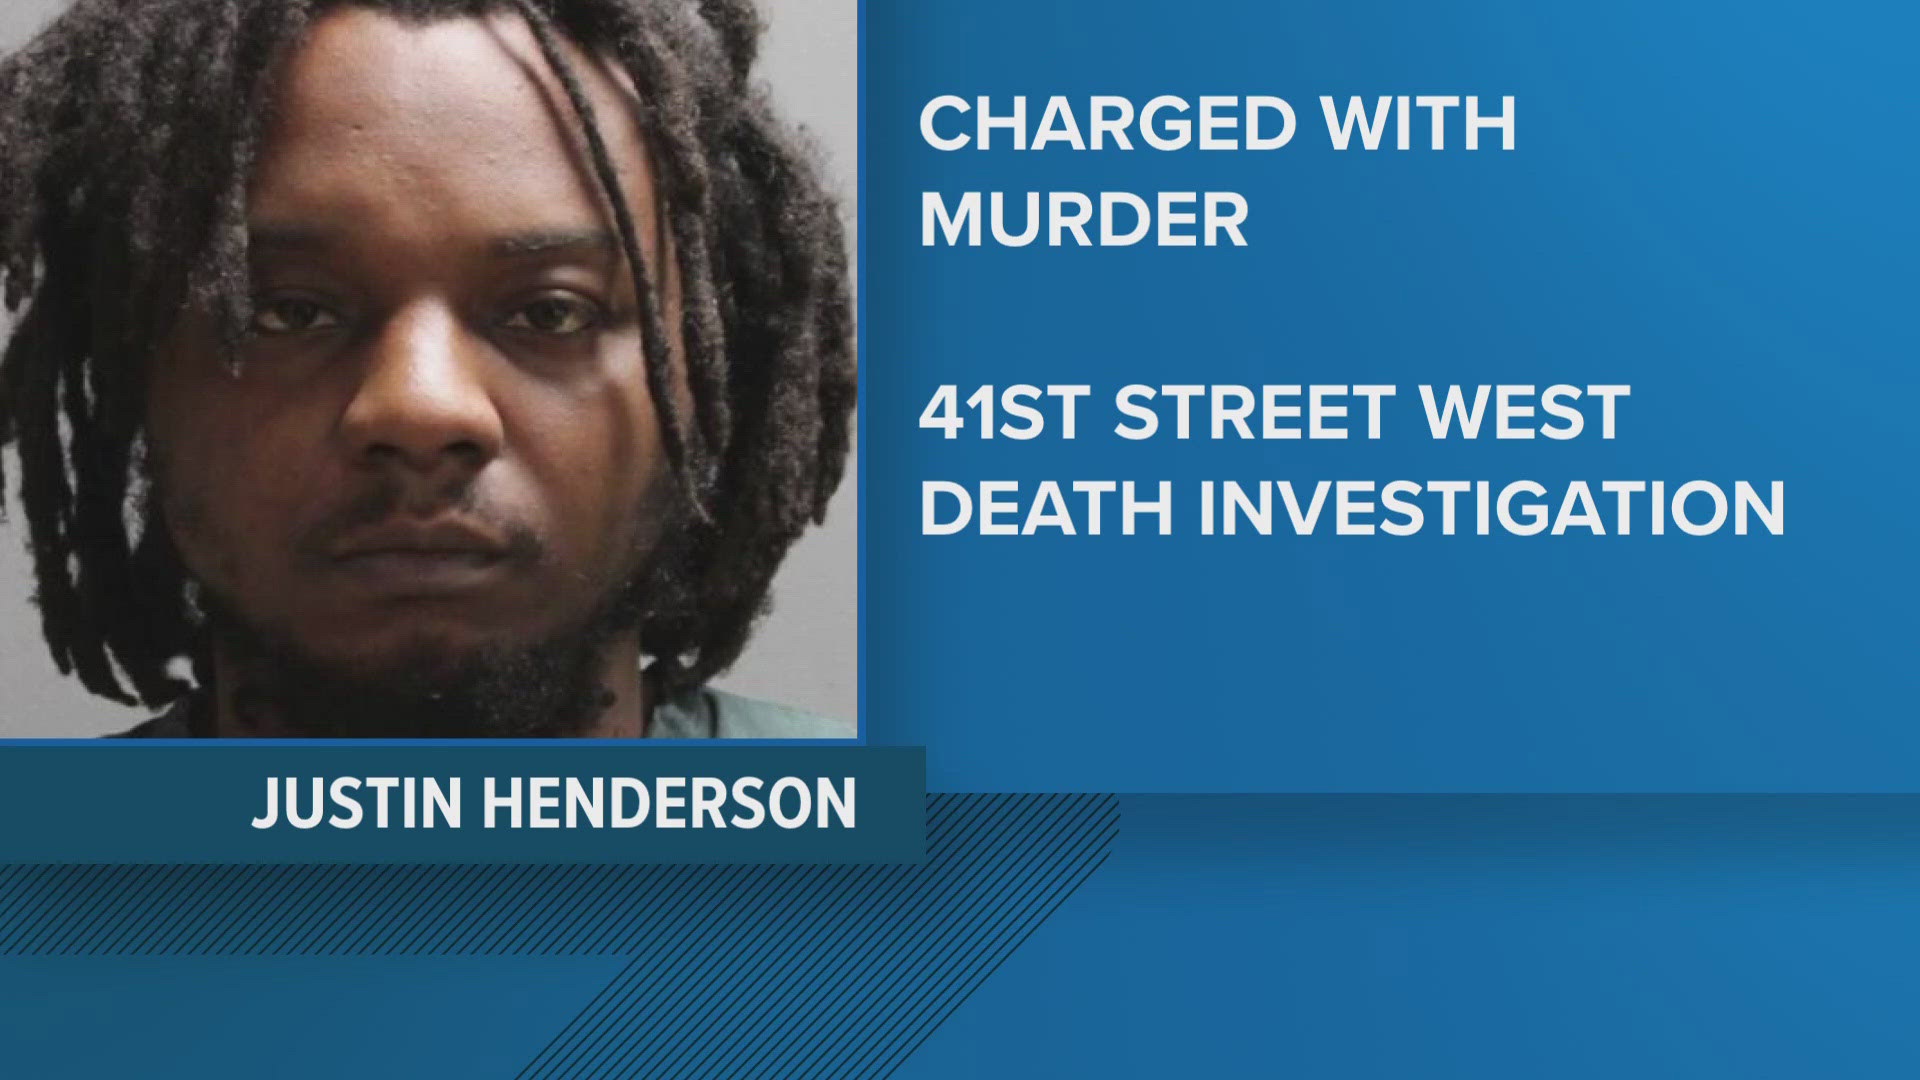 Justin Henderson, 35, was also charged with abusing a dead body.